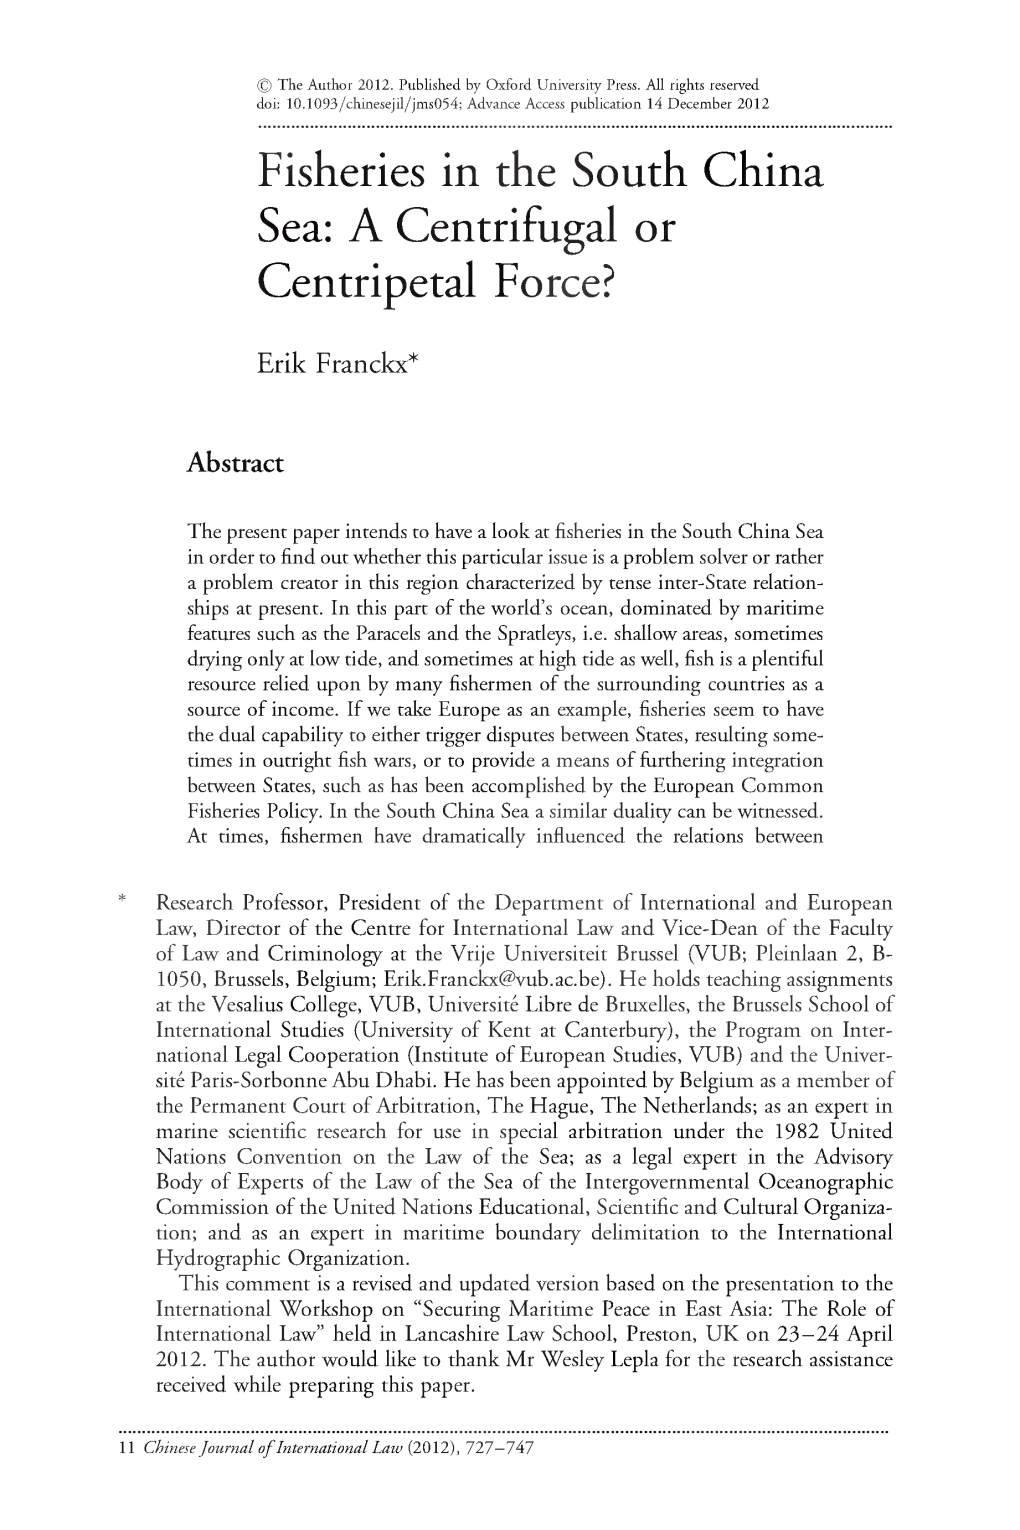 Fisheries in the South China Sea: a Centrifugal Or Centripetal Force?